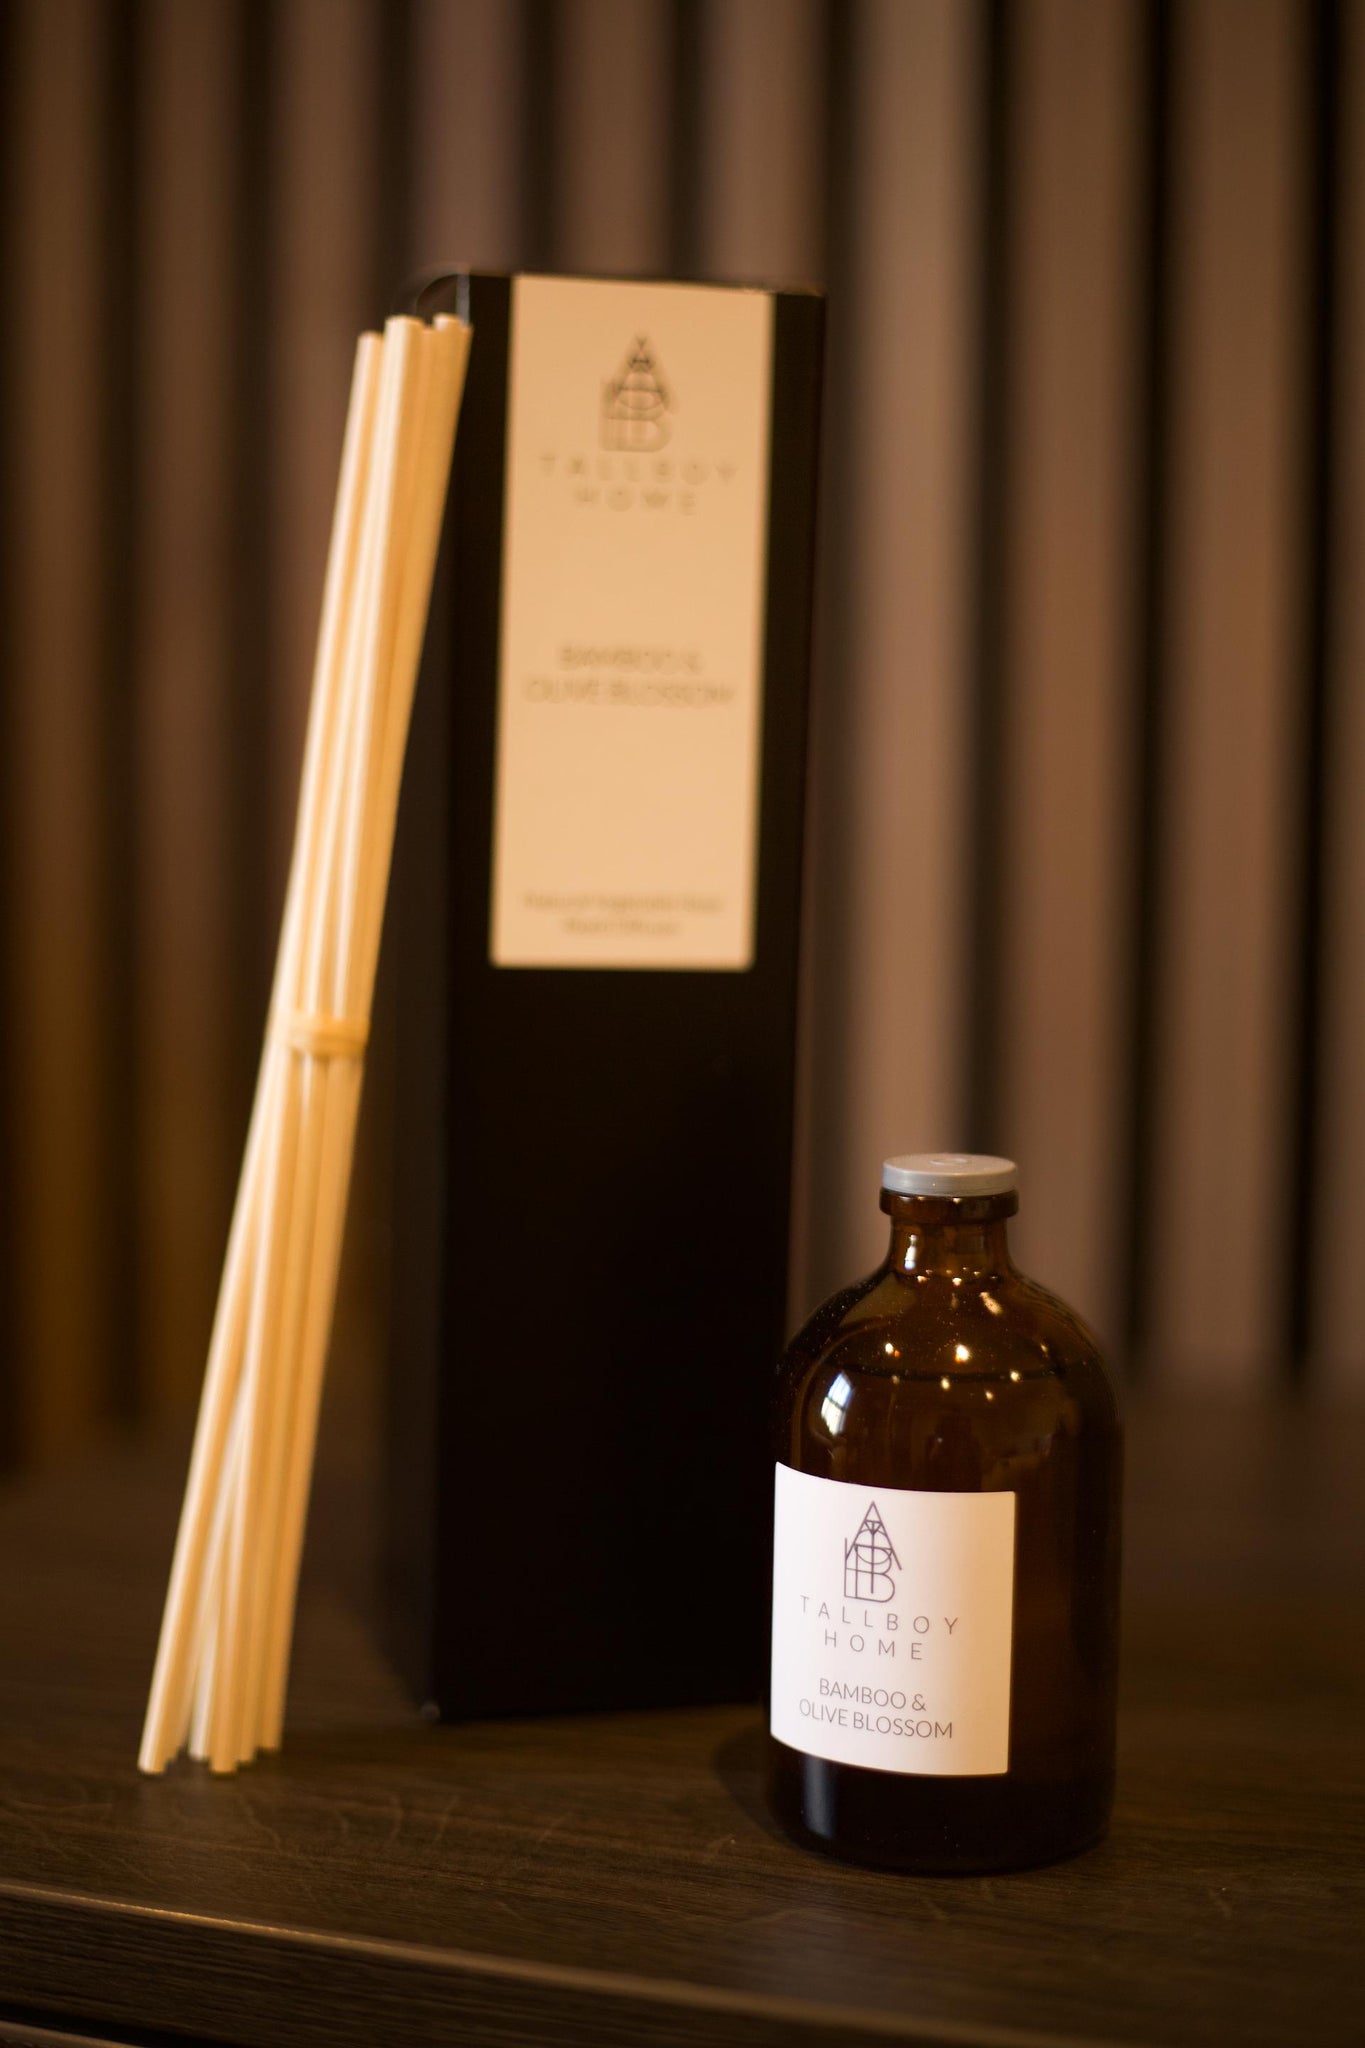 Natural Vegetable base Reed Diffuser - Bamboo & Olive Blossom